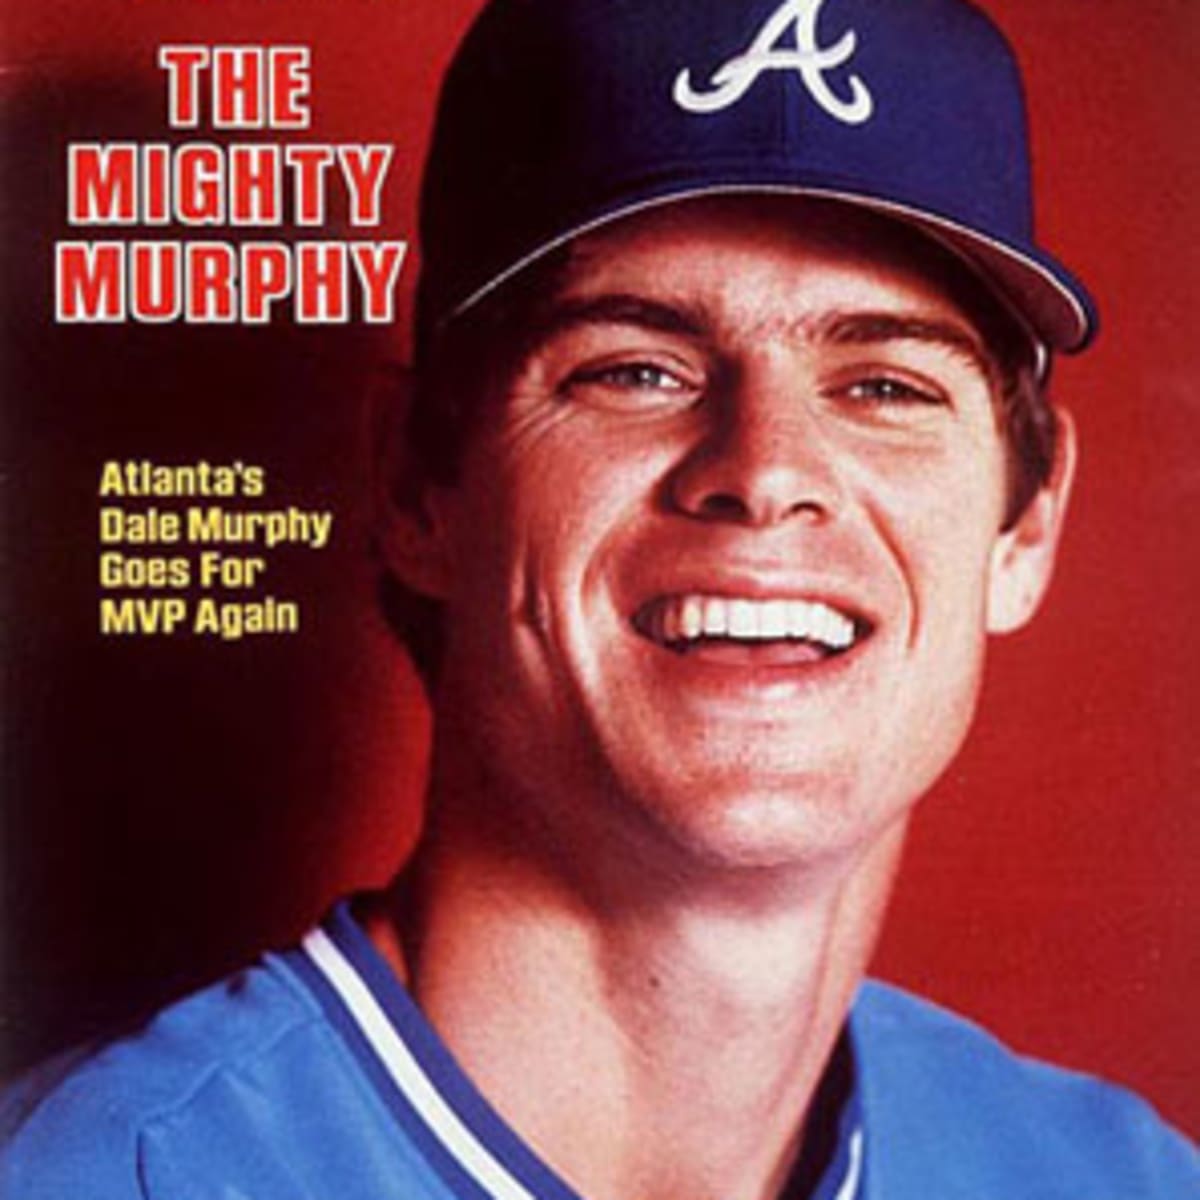 Batting Clean' makes the case for Dale Murphy - Deseret News